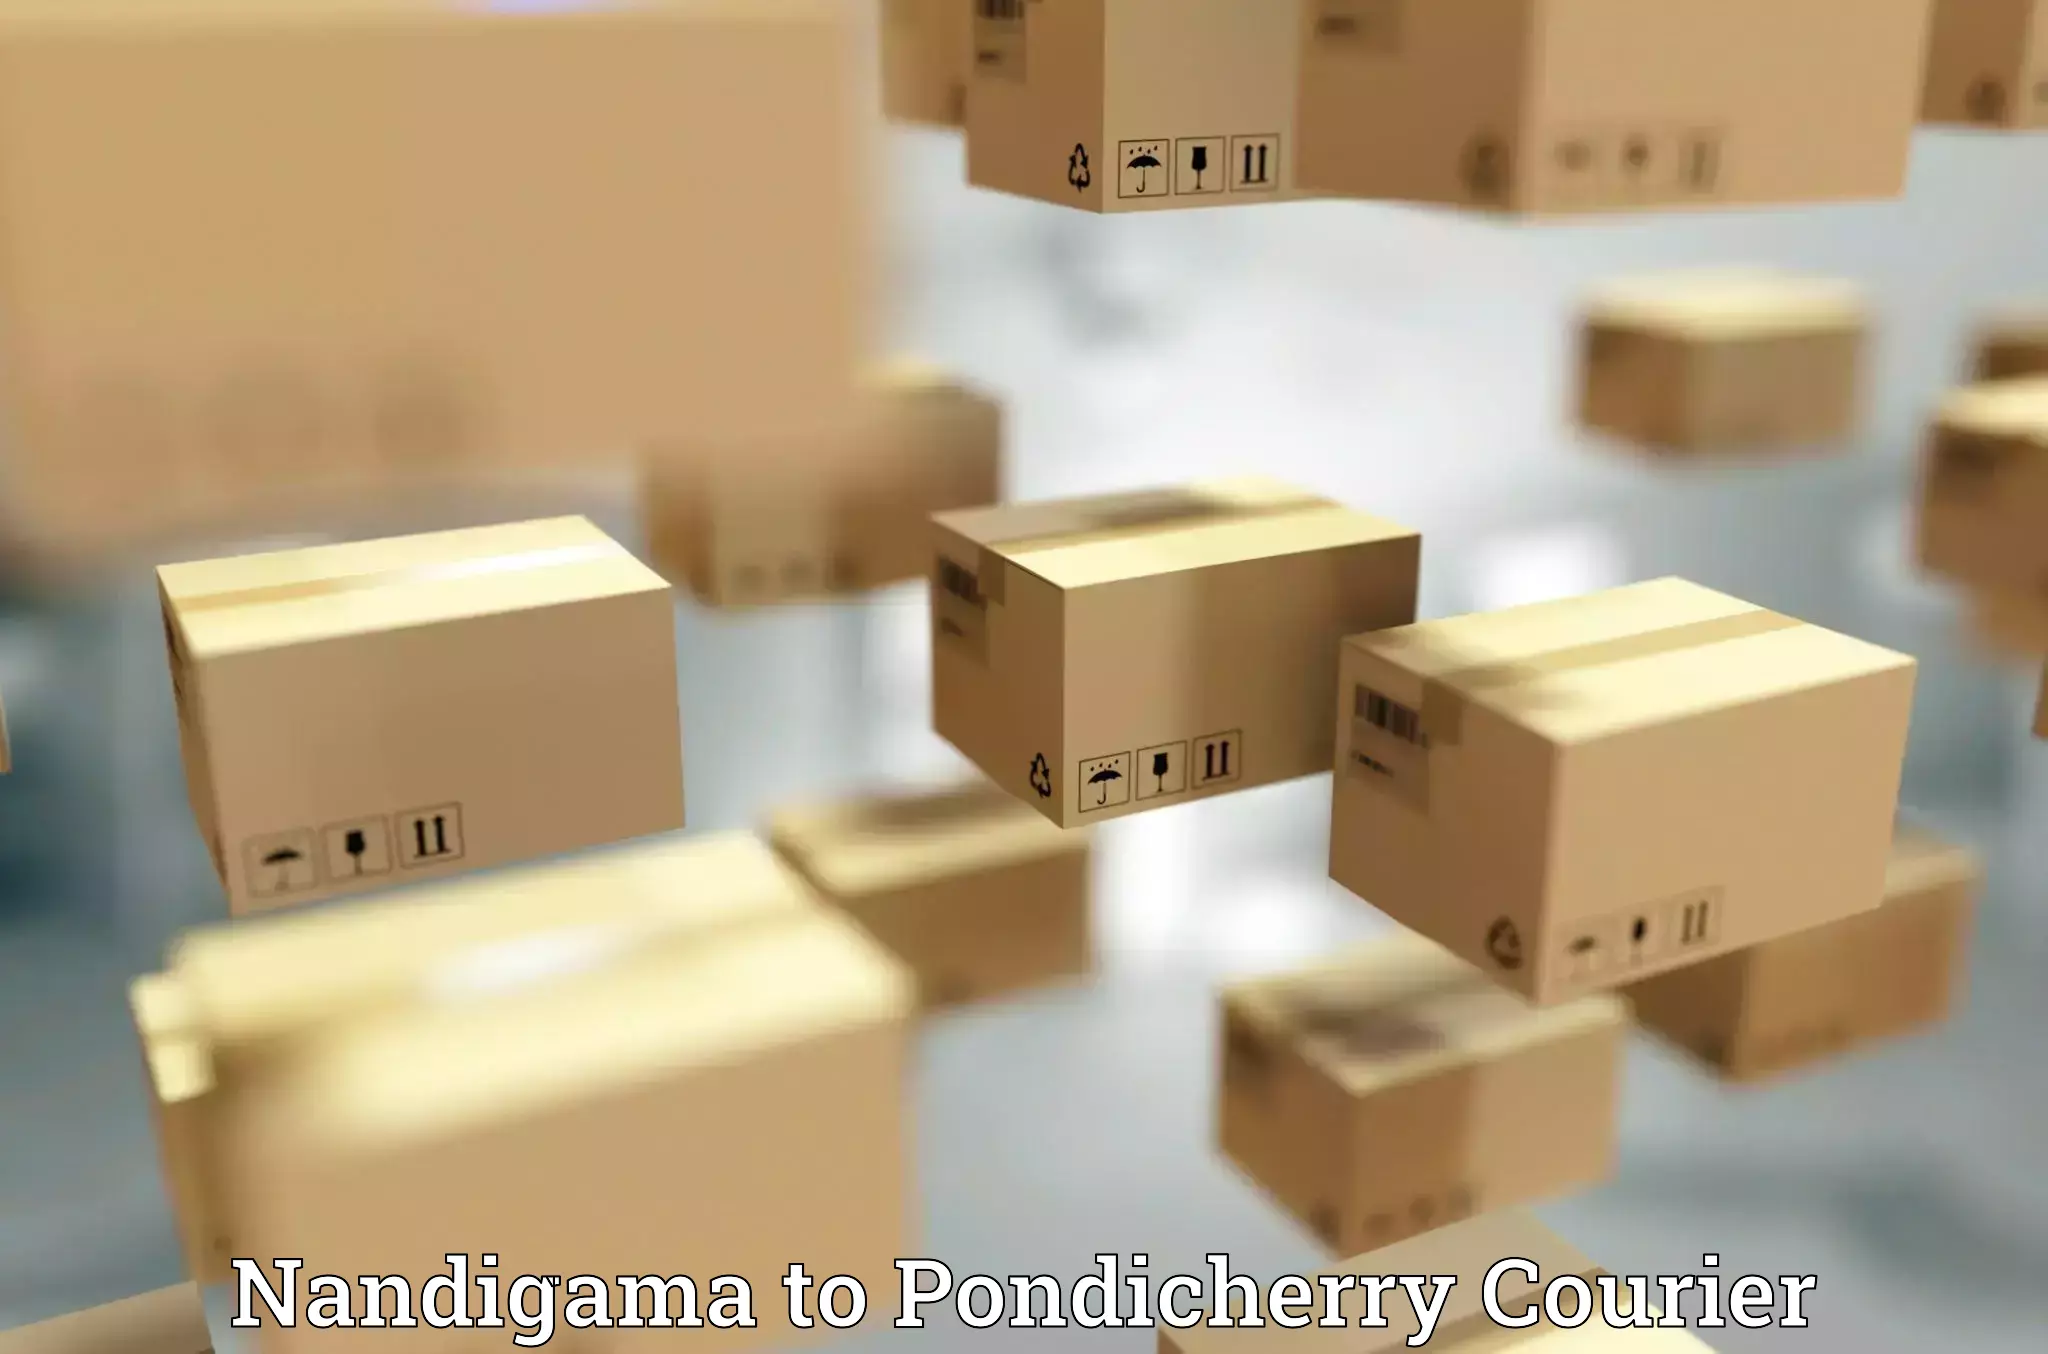 User-friendly delivery service Nandigama to Pondicherry